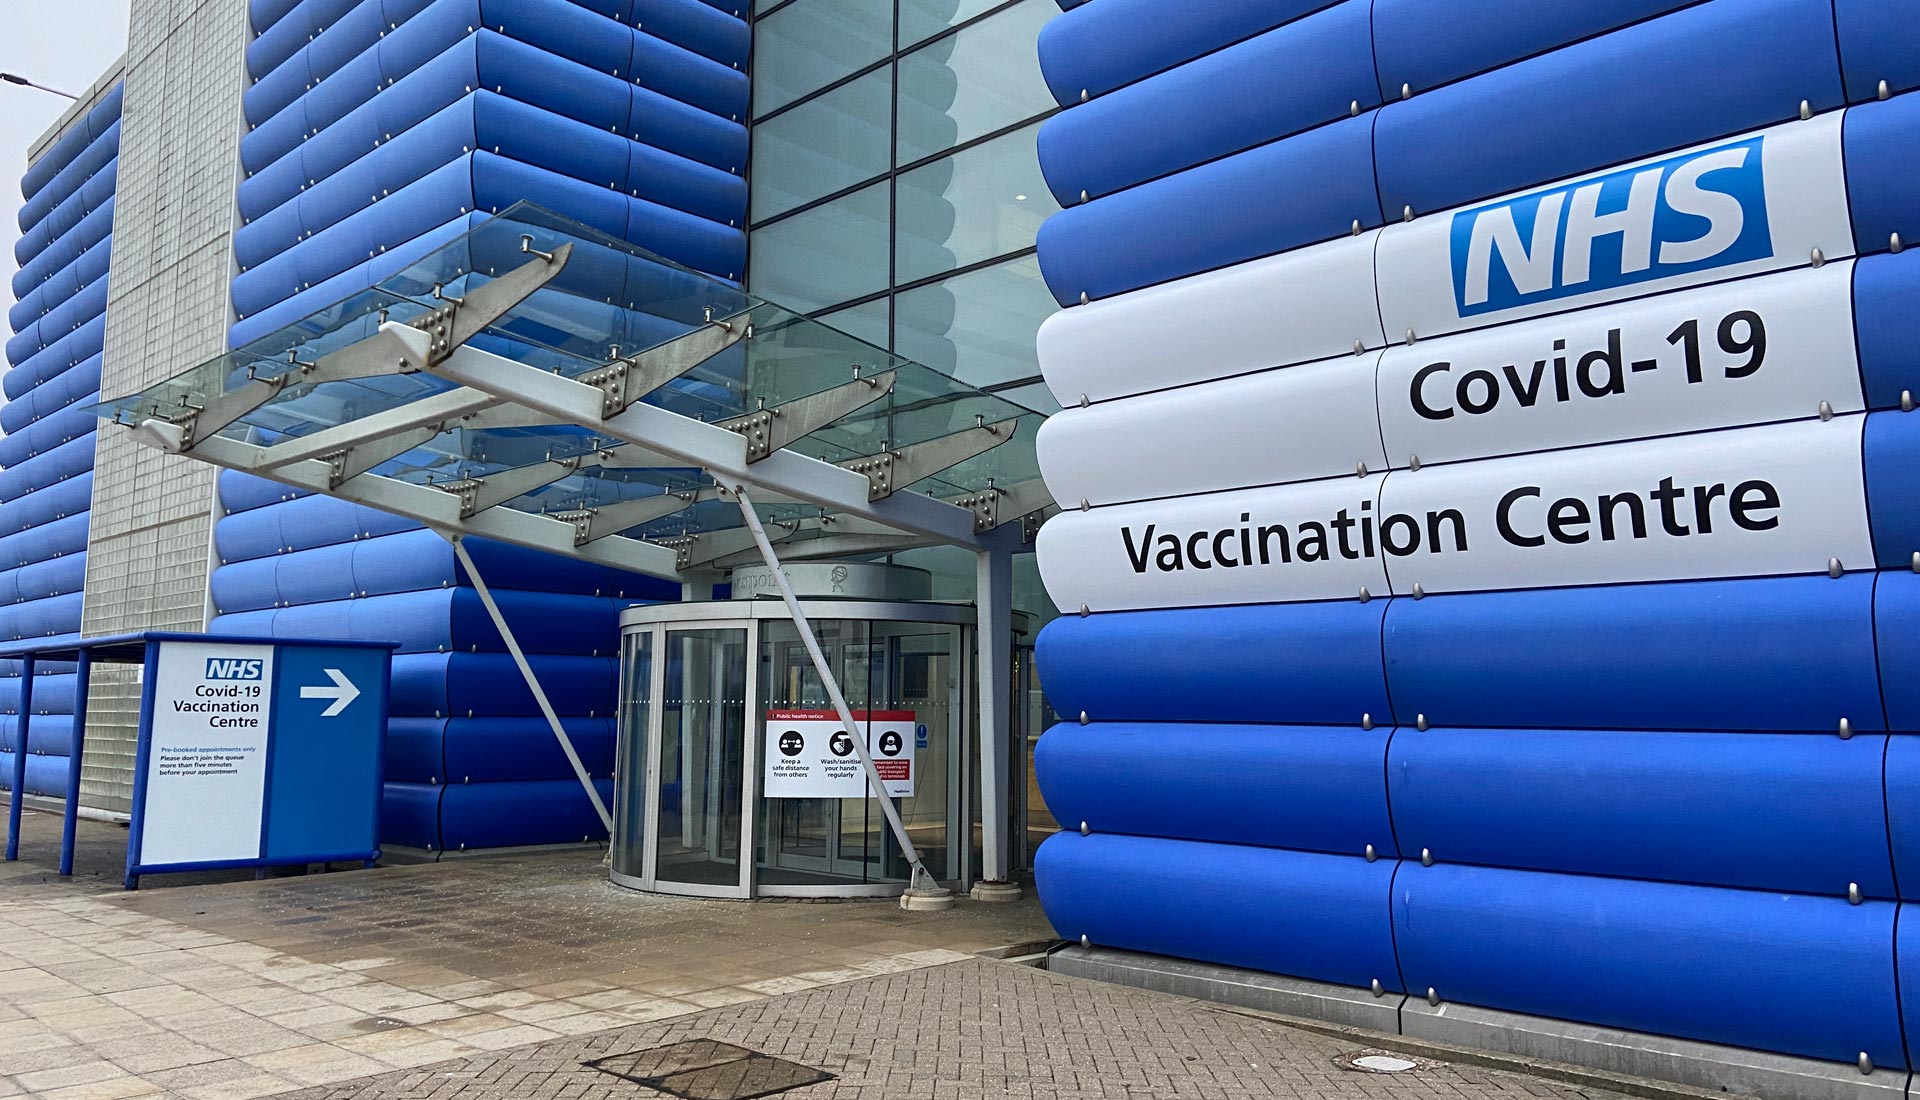 NHS Vaccination Centre